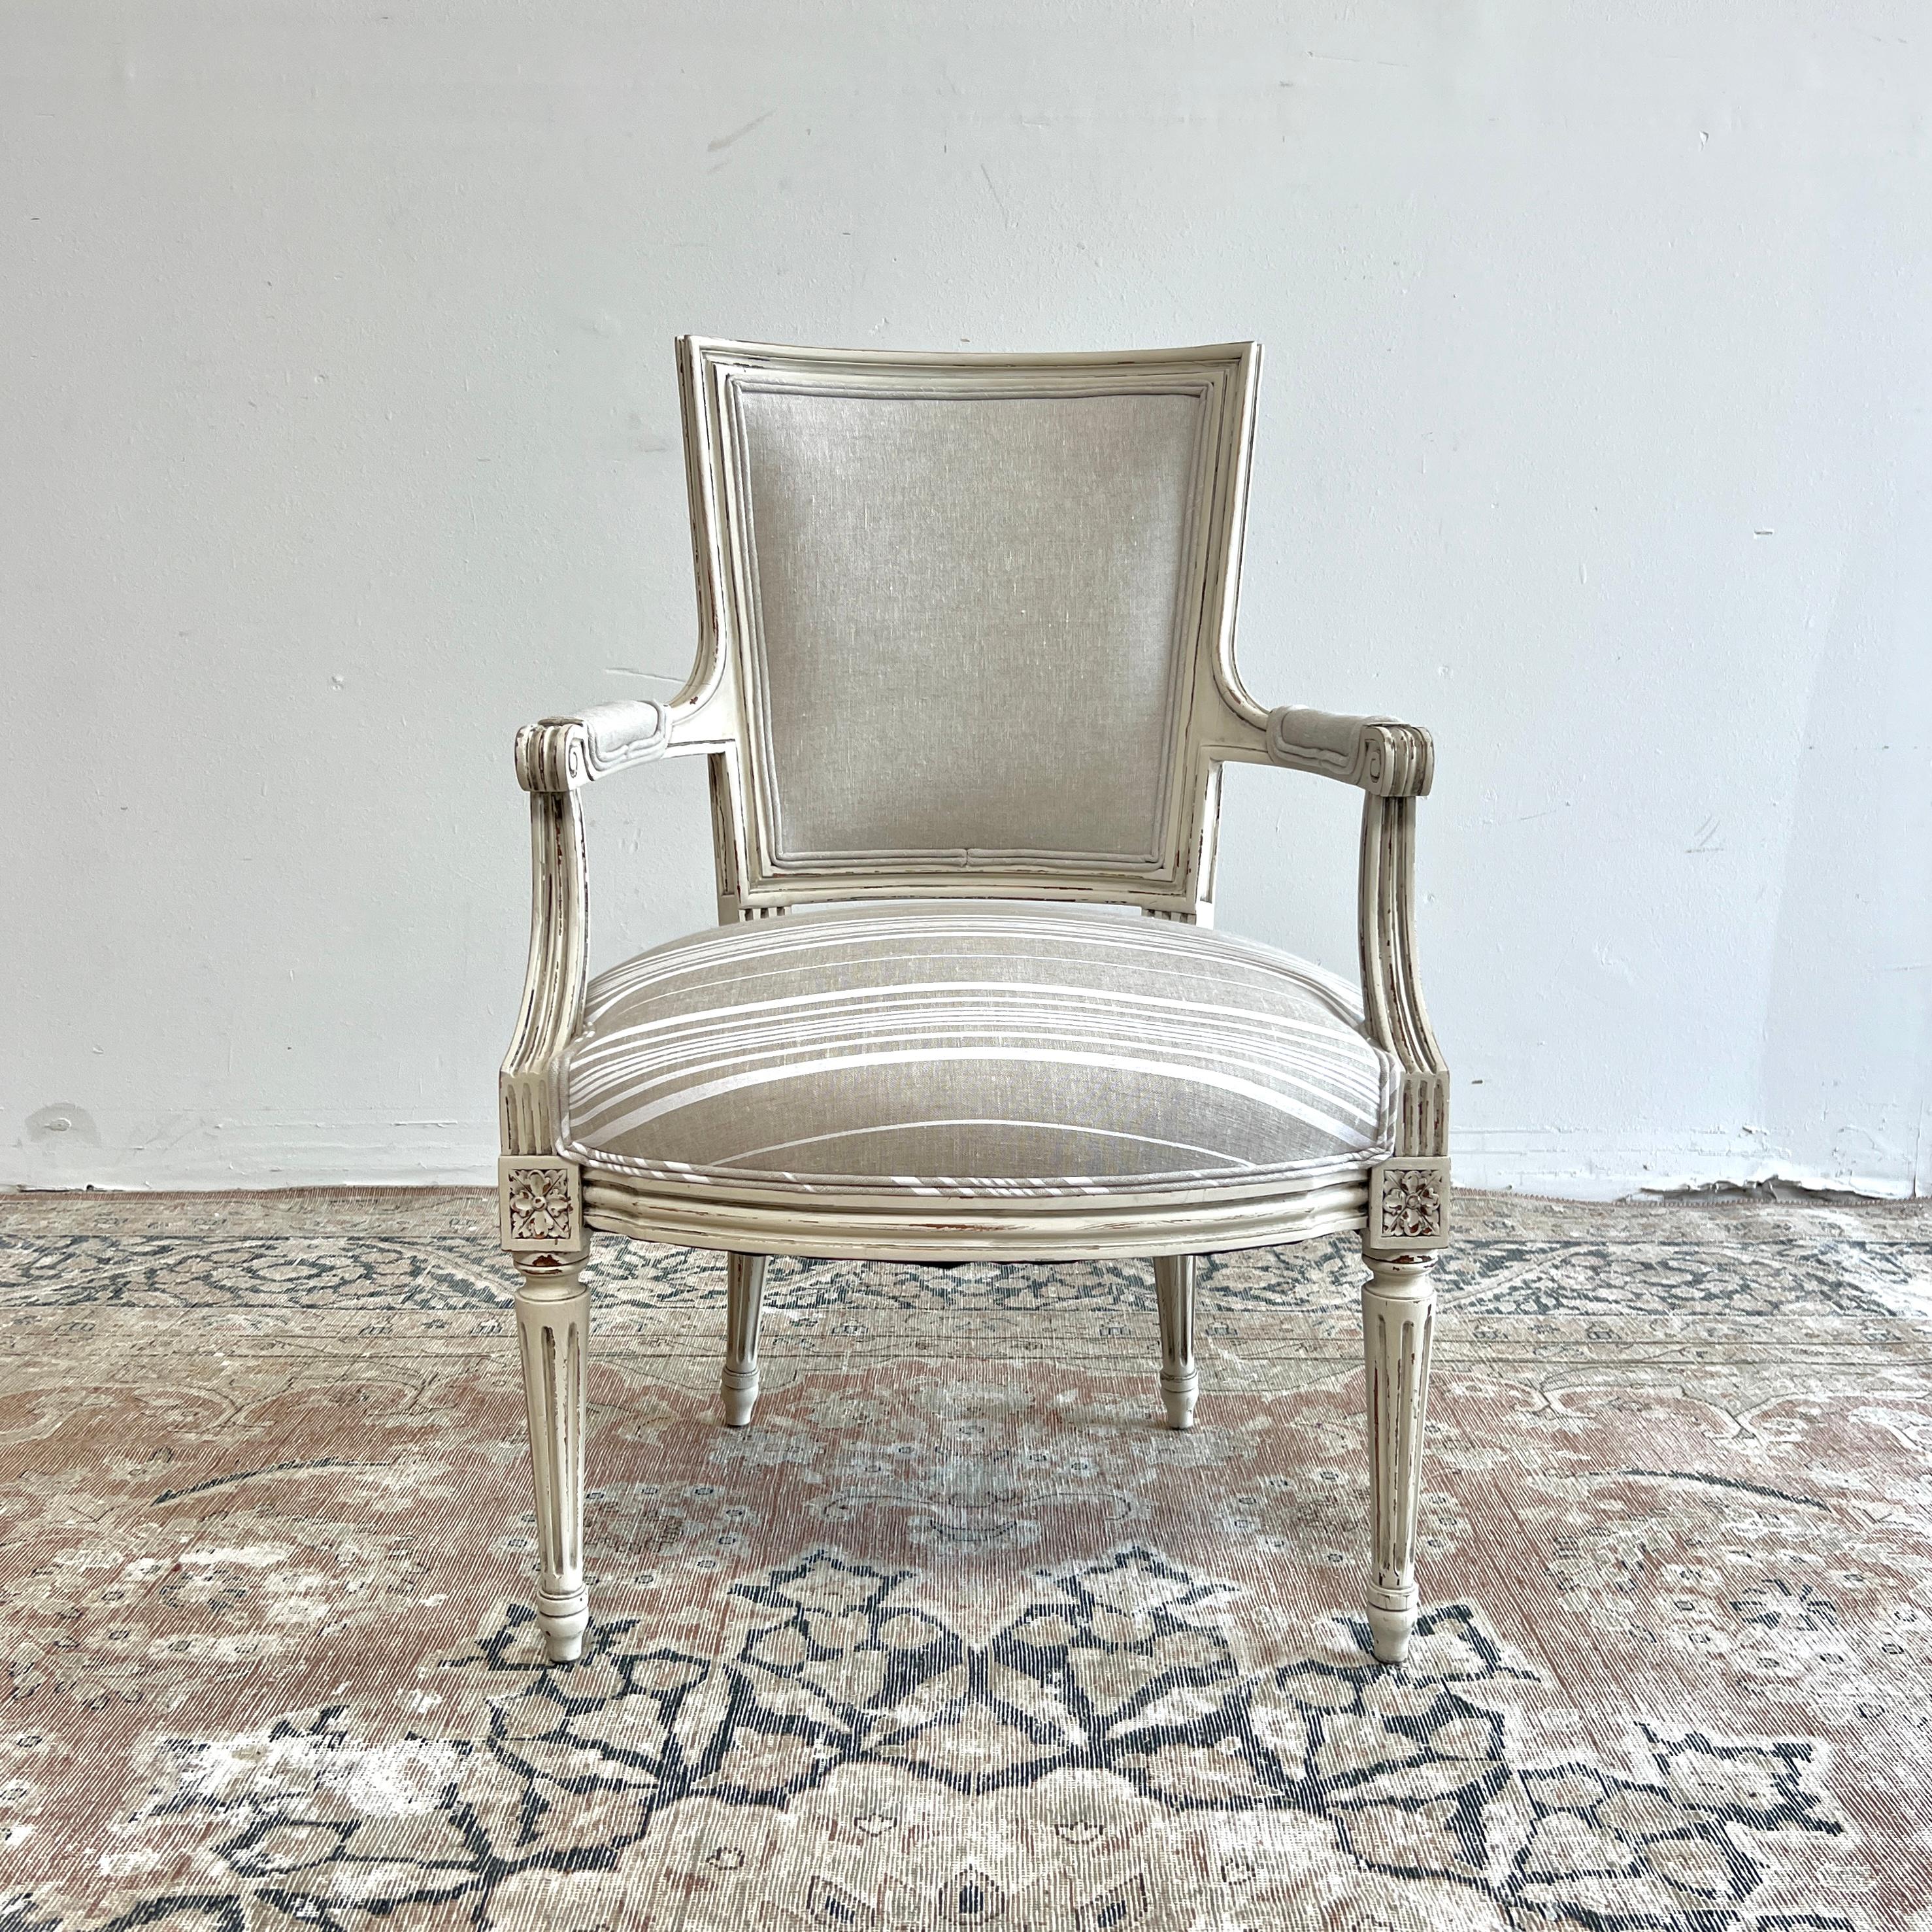 Pair of vintage french style open arm chairs painted in our antique white with subtle distressed edges, and antique patina.
Upholstered in a french stripe linen and natural oatmeal linen.
Size:
22.5